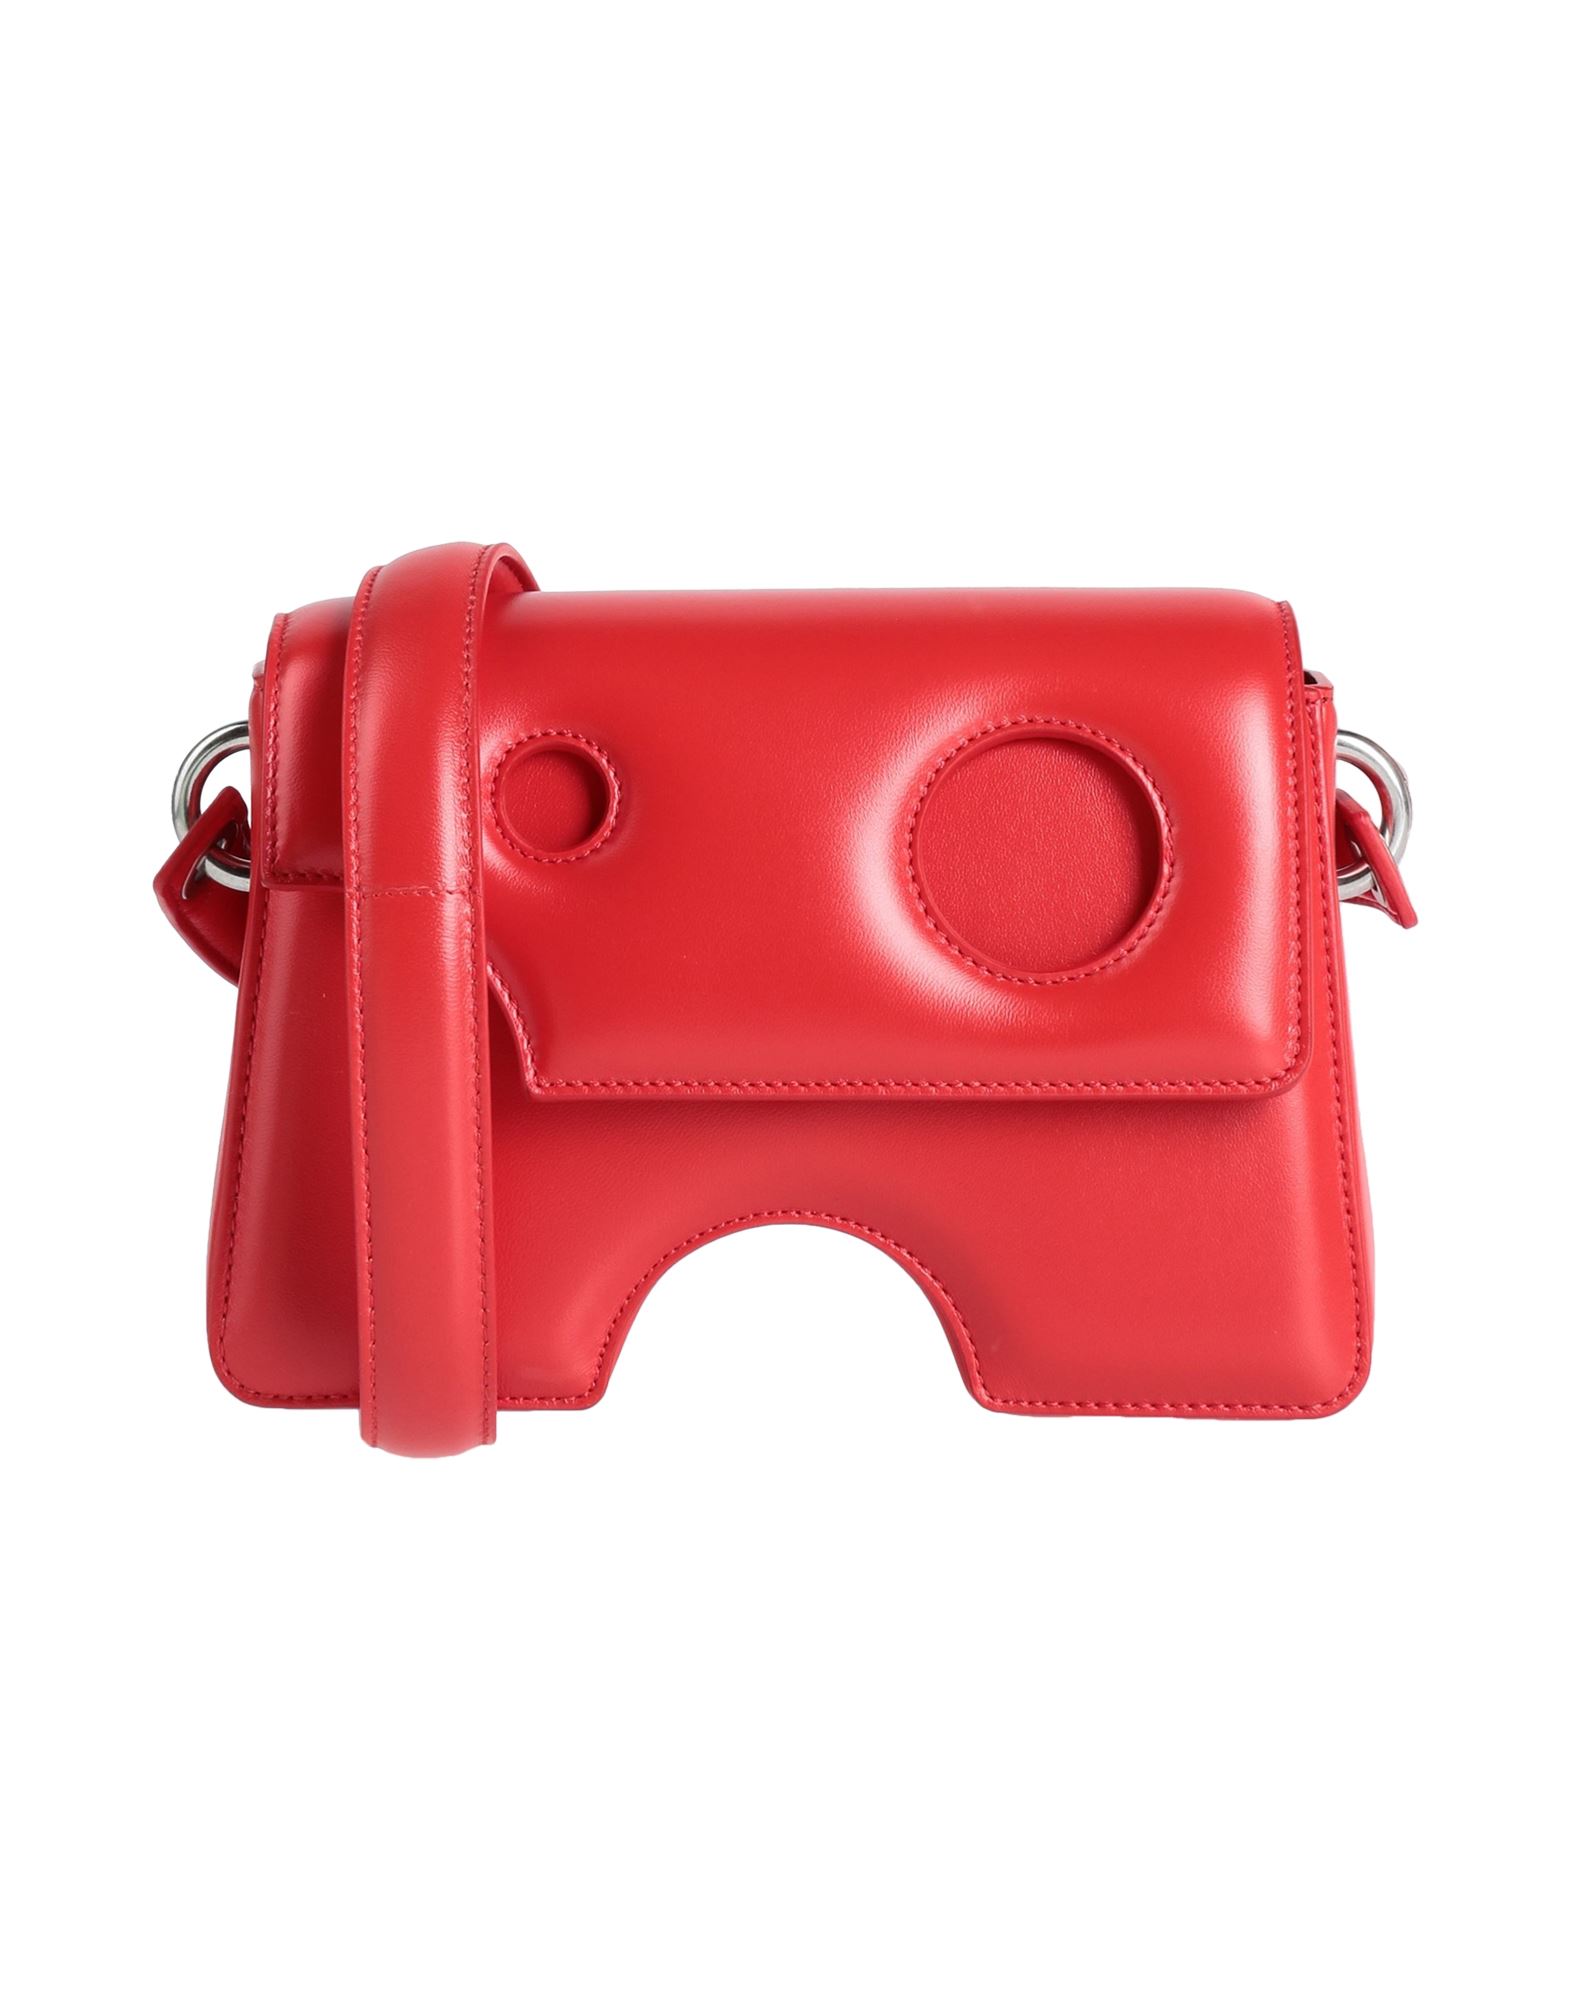 Off-white &trade; Handbags In Red